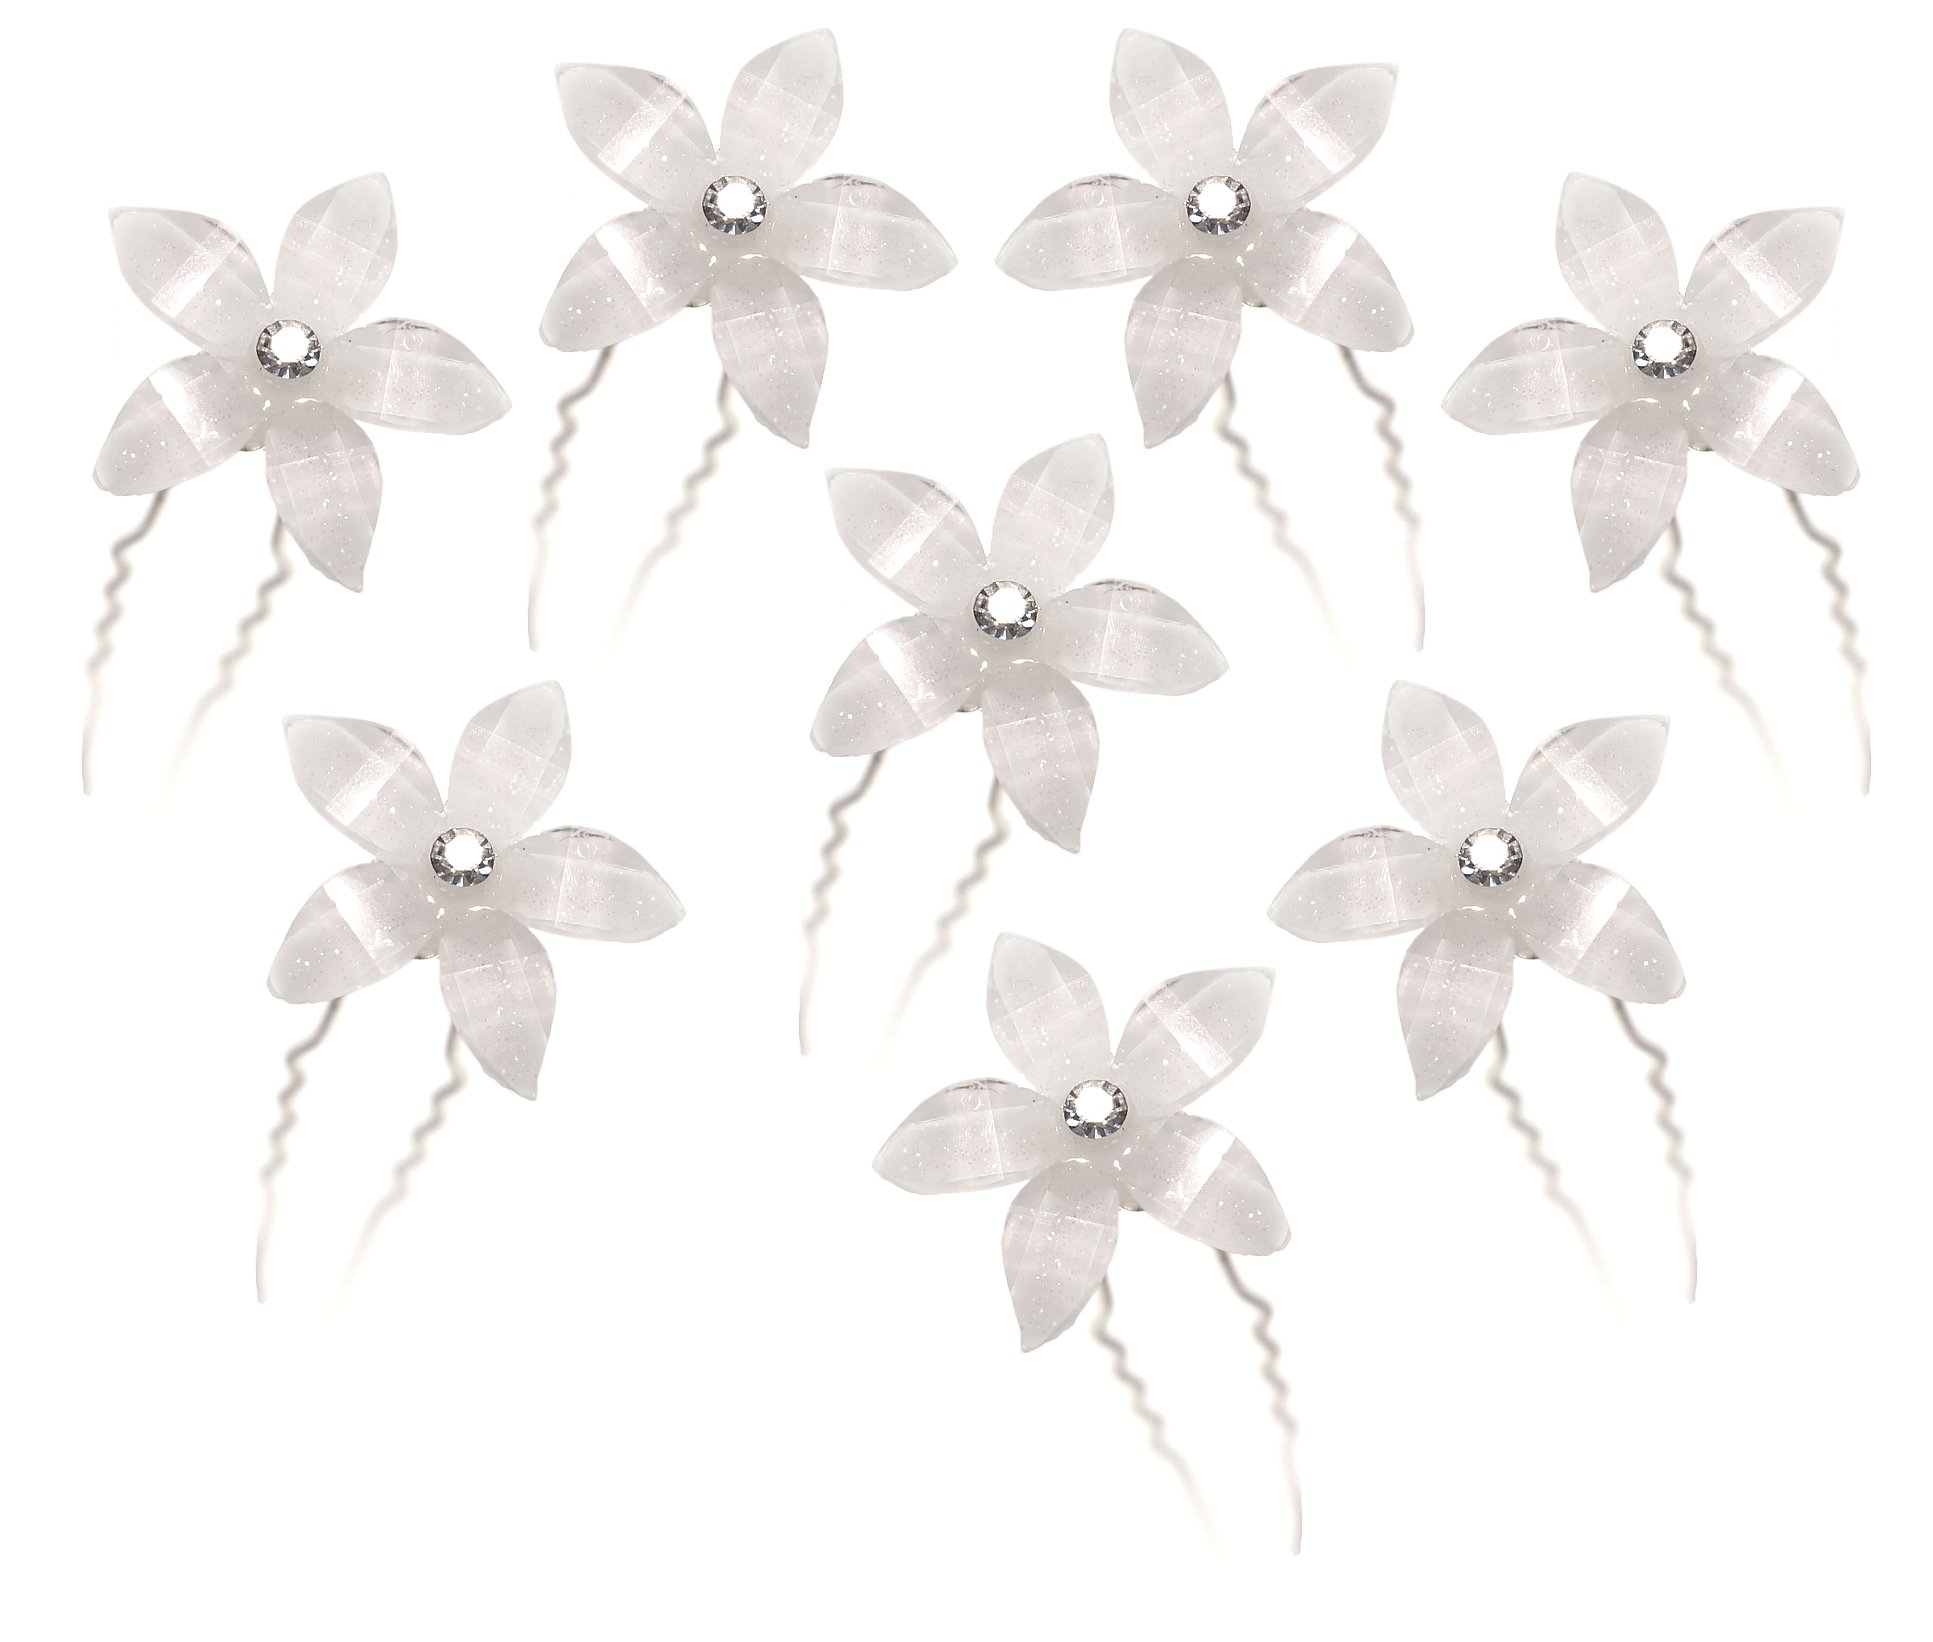 Amazon.com : White Flower Hair Pin Twister Coil Spiral with ...